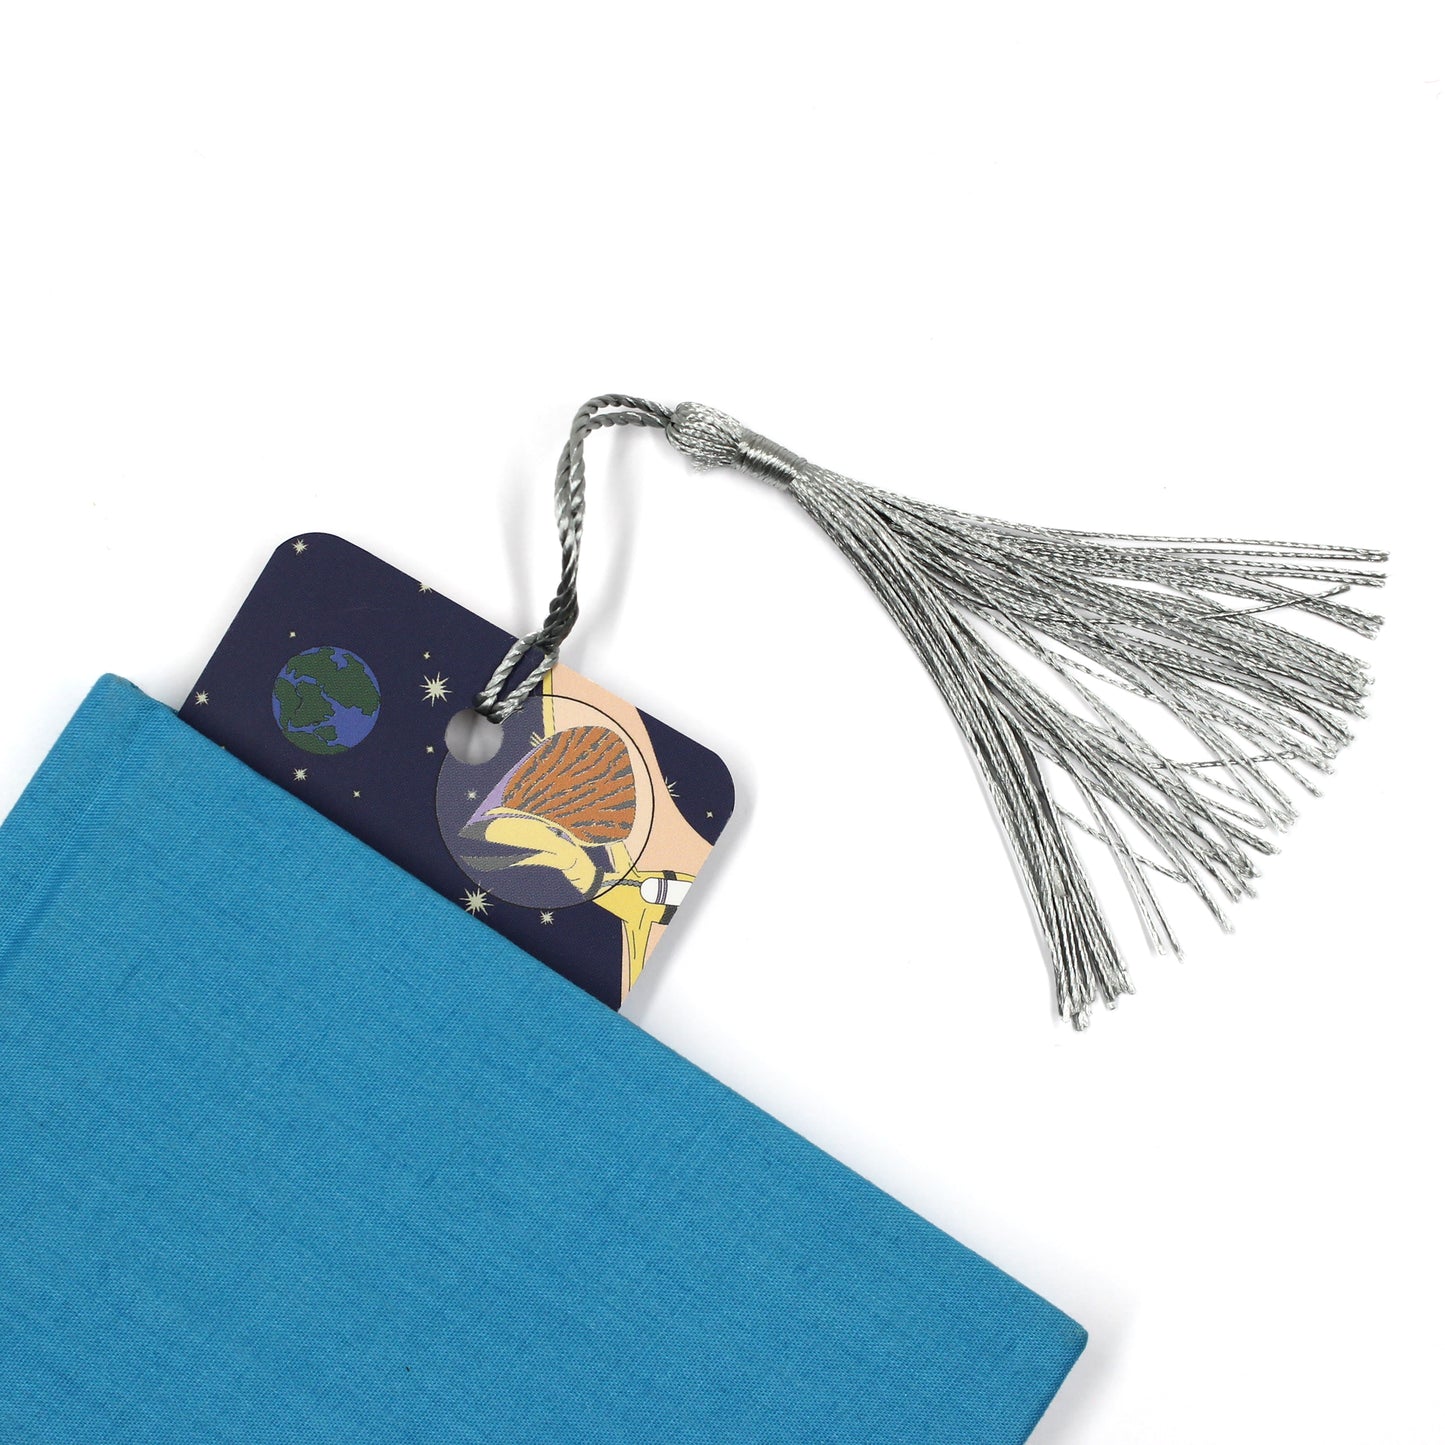 space dinosaur bookmark with a grey tassel coming out of a blue book